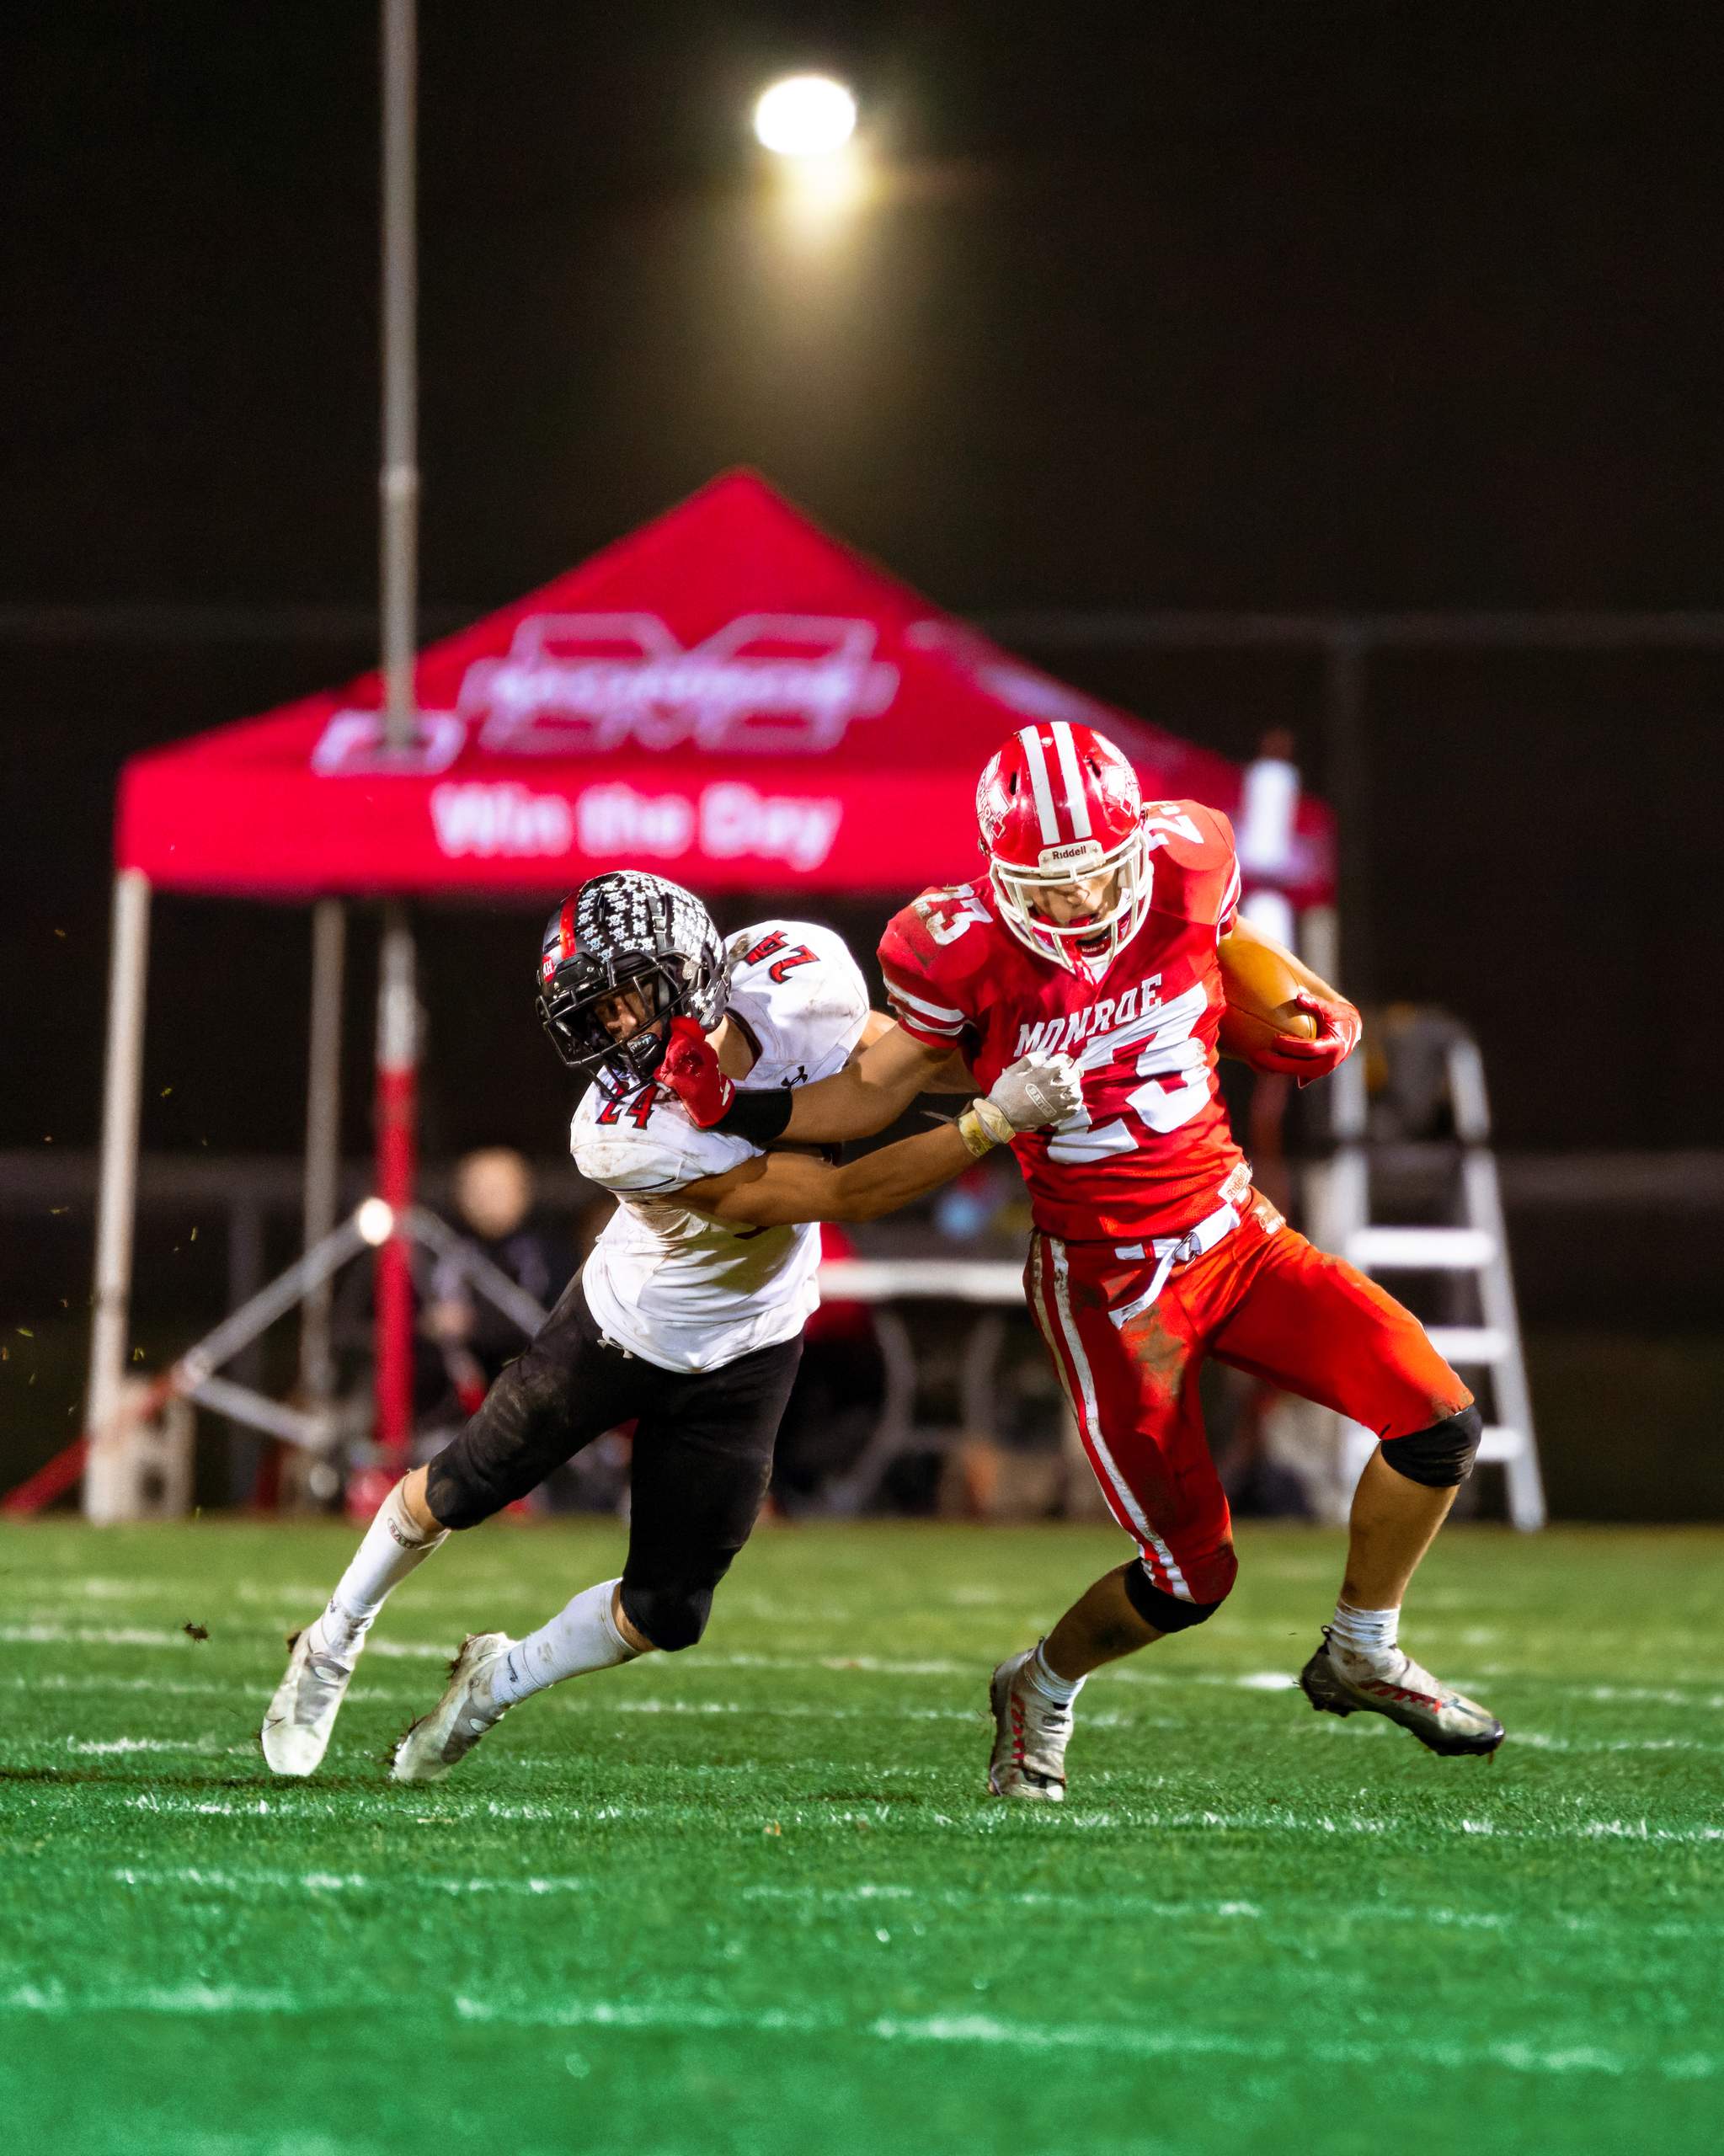 Monroe vs. Pewaukee, Round 2 of the 2022 WIAA Playoffs, photography by Ross Harried for Second Crop Sports